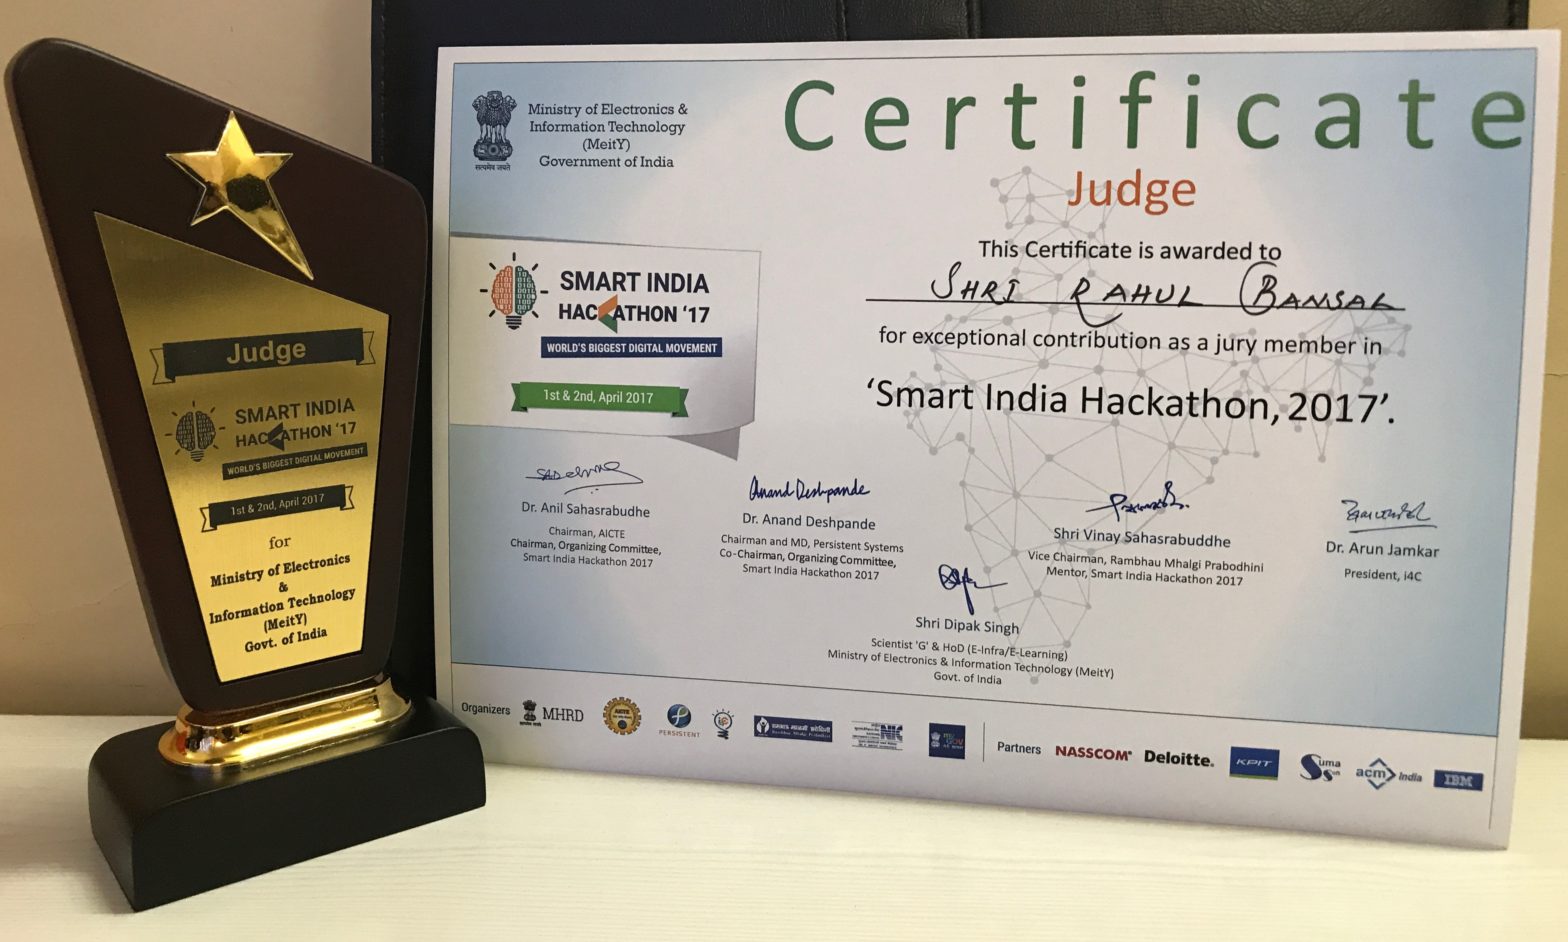 Being Part of Smart India Hackathon 2017